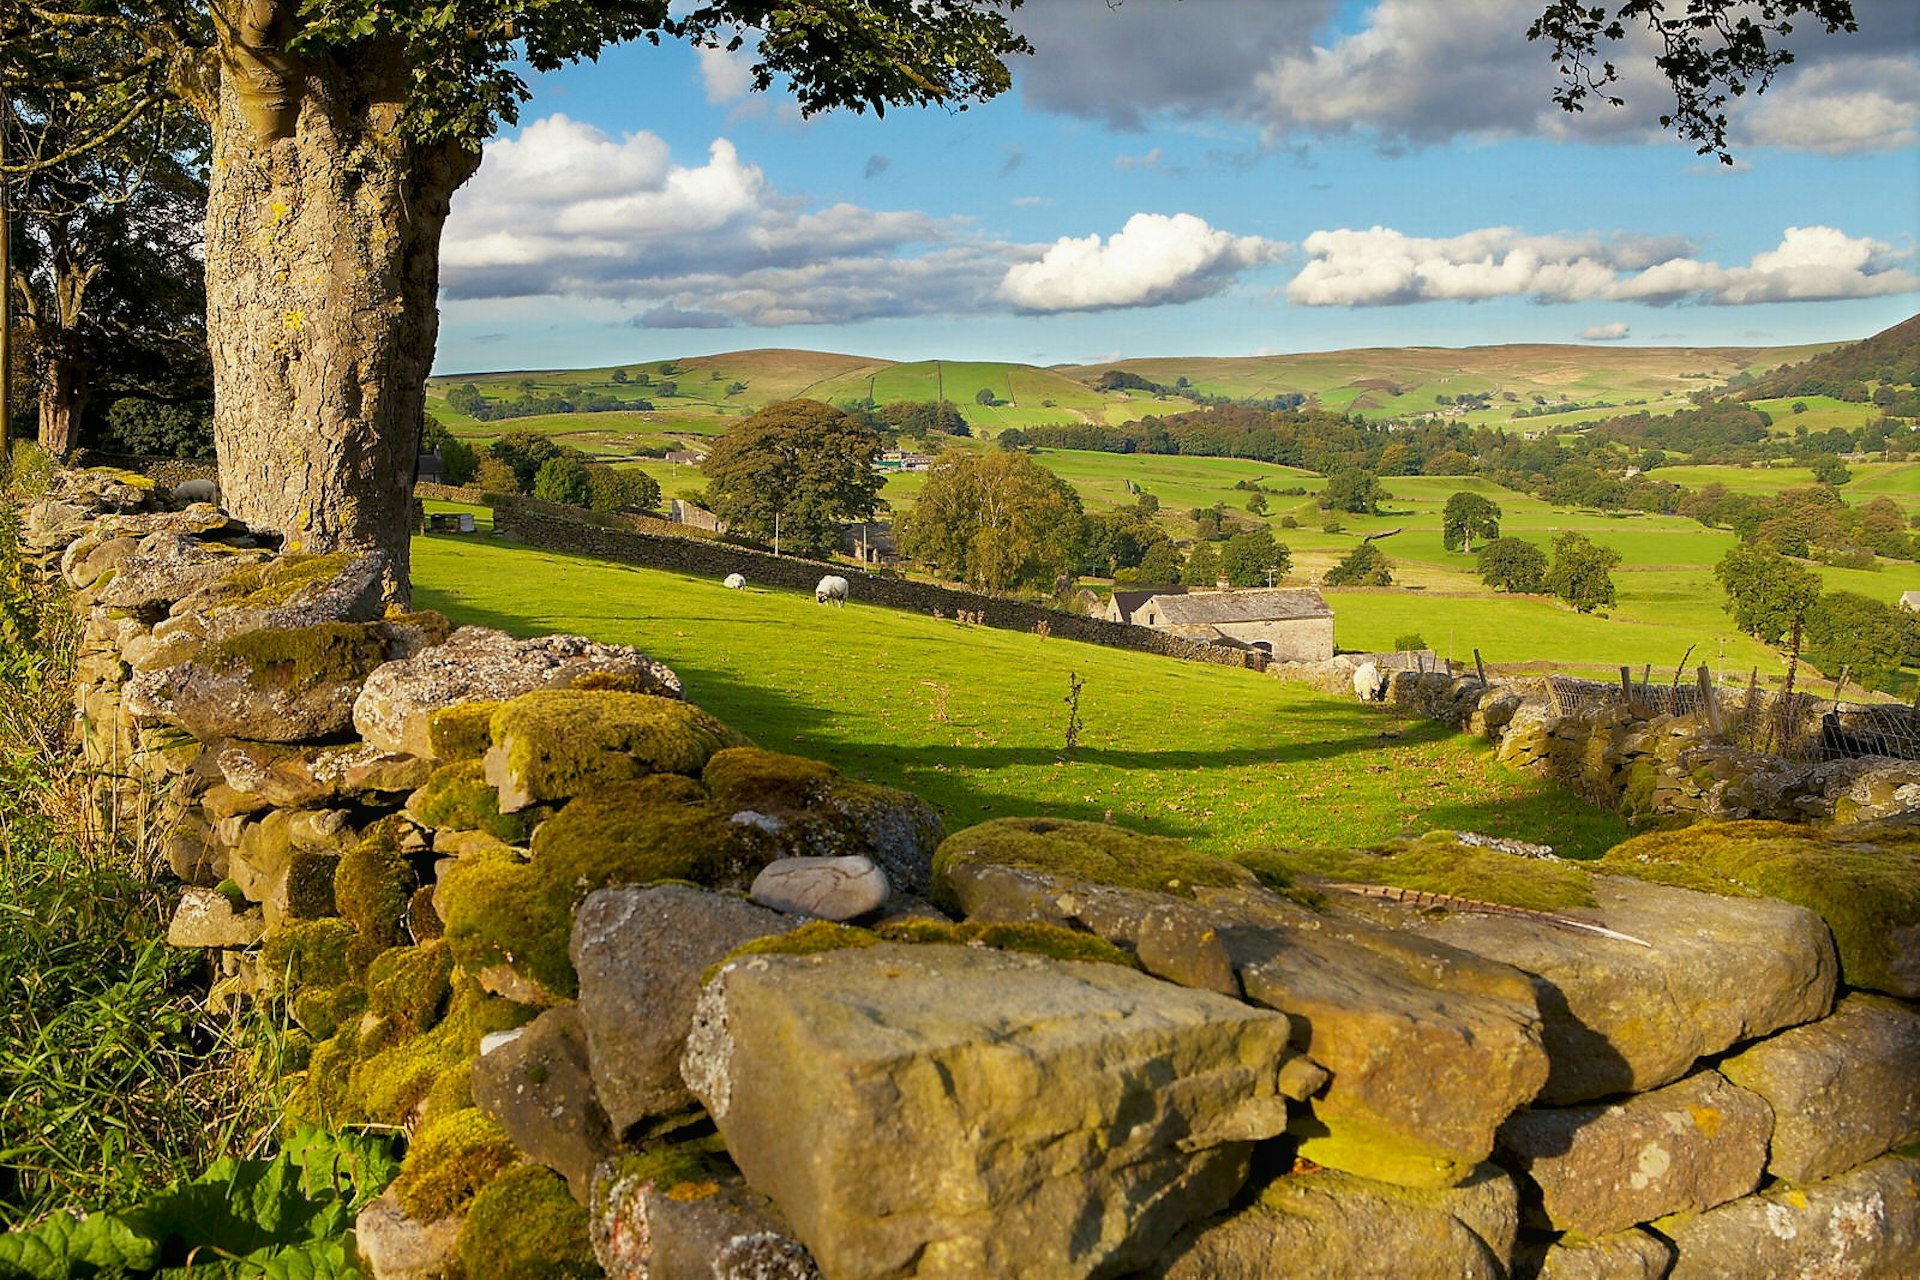 A view over a stone wall of the countryside of the Yorkshire Dales